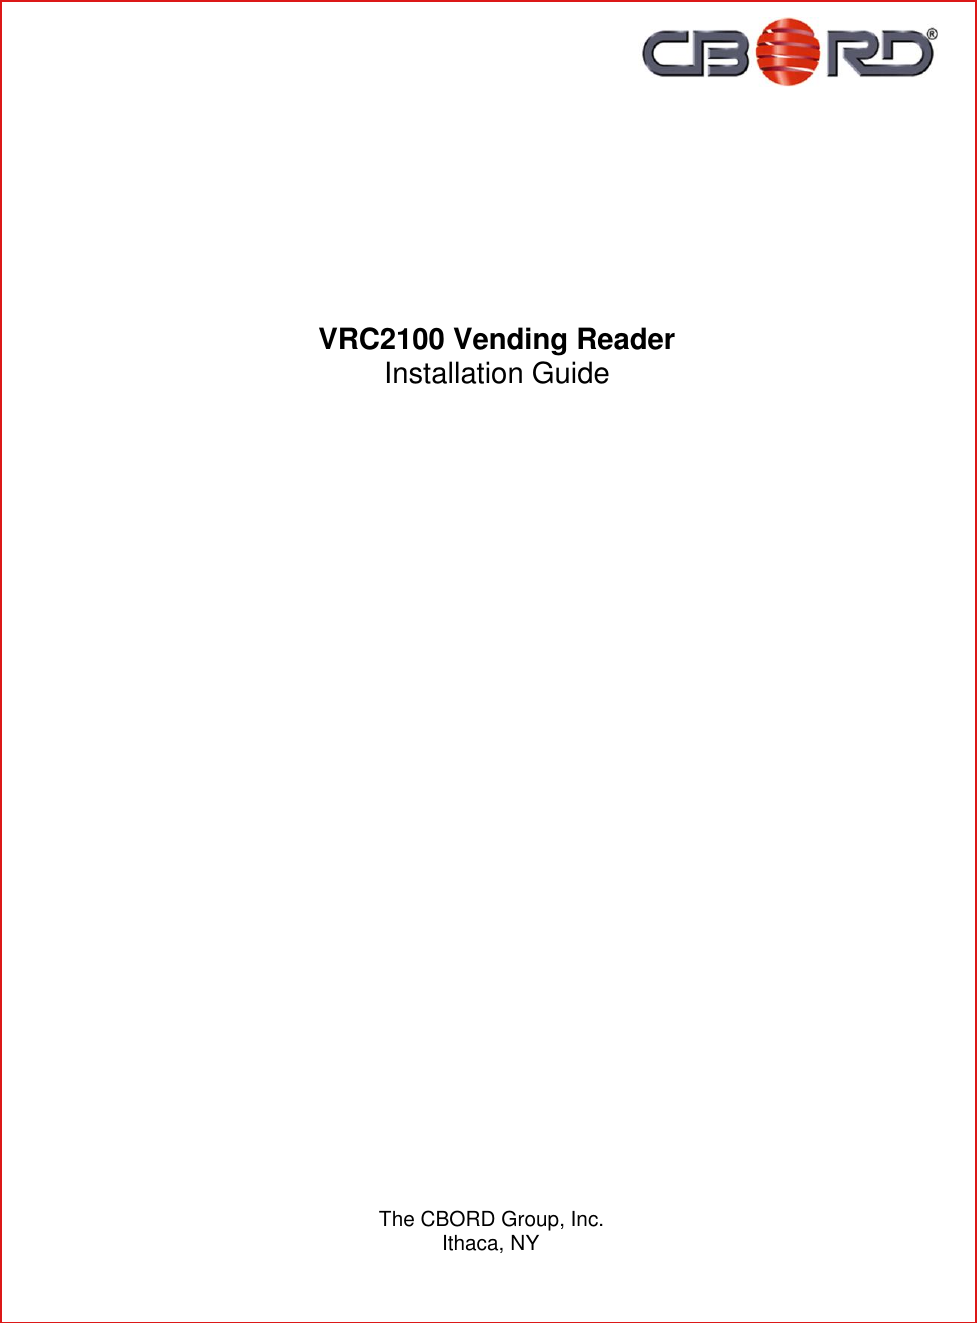                              VRC2100 Vending Reader Installation Guide              The CBORD Group, Inc. Ithaca, NY 